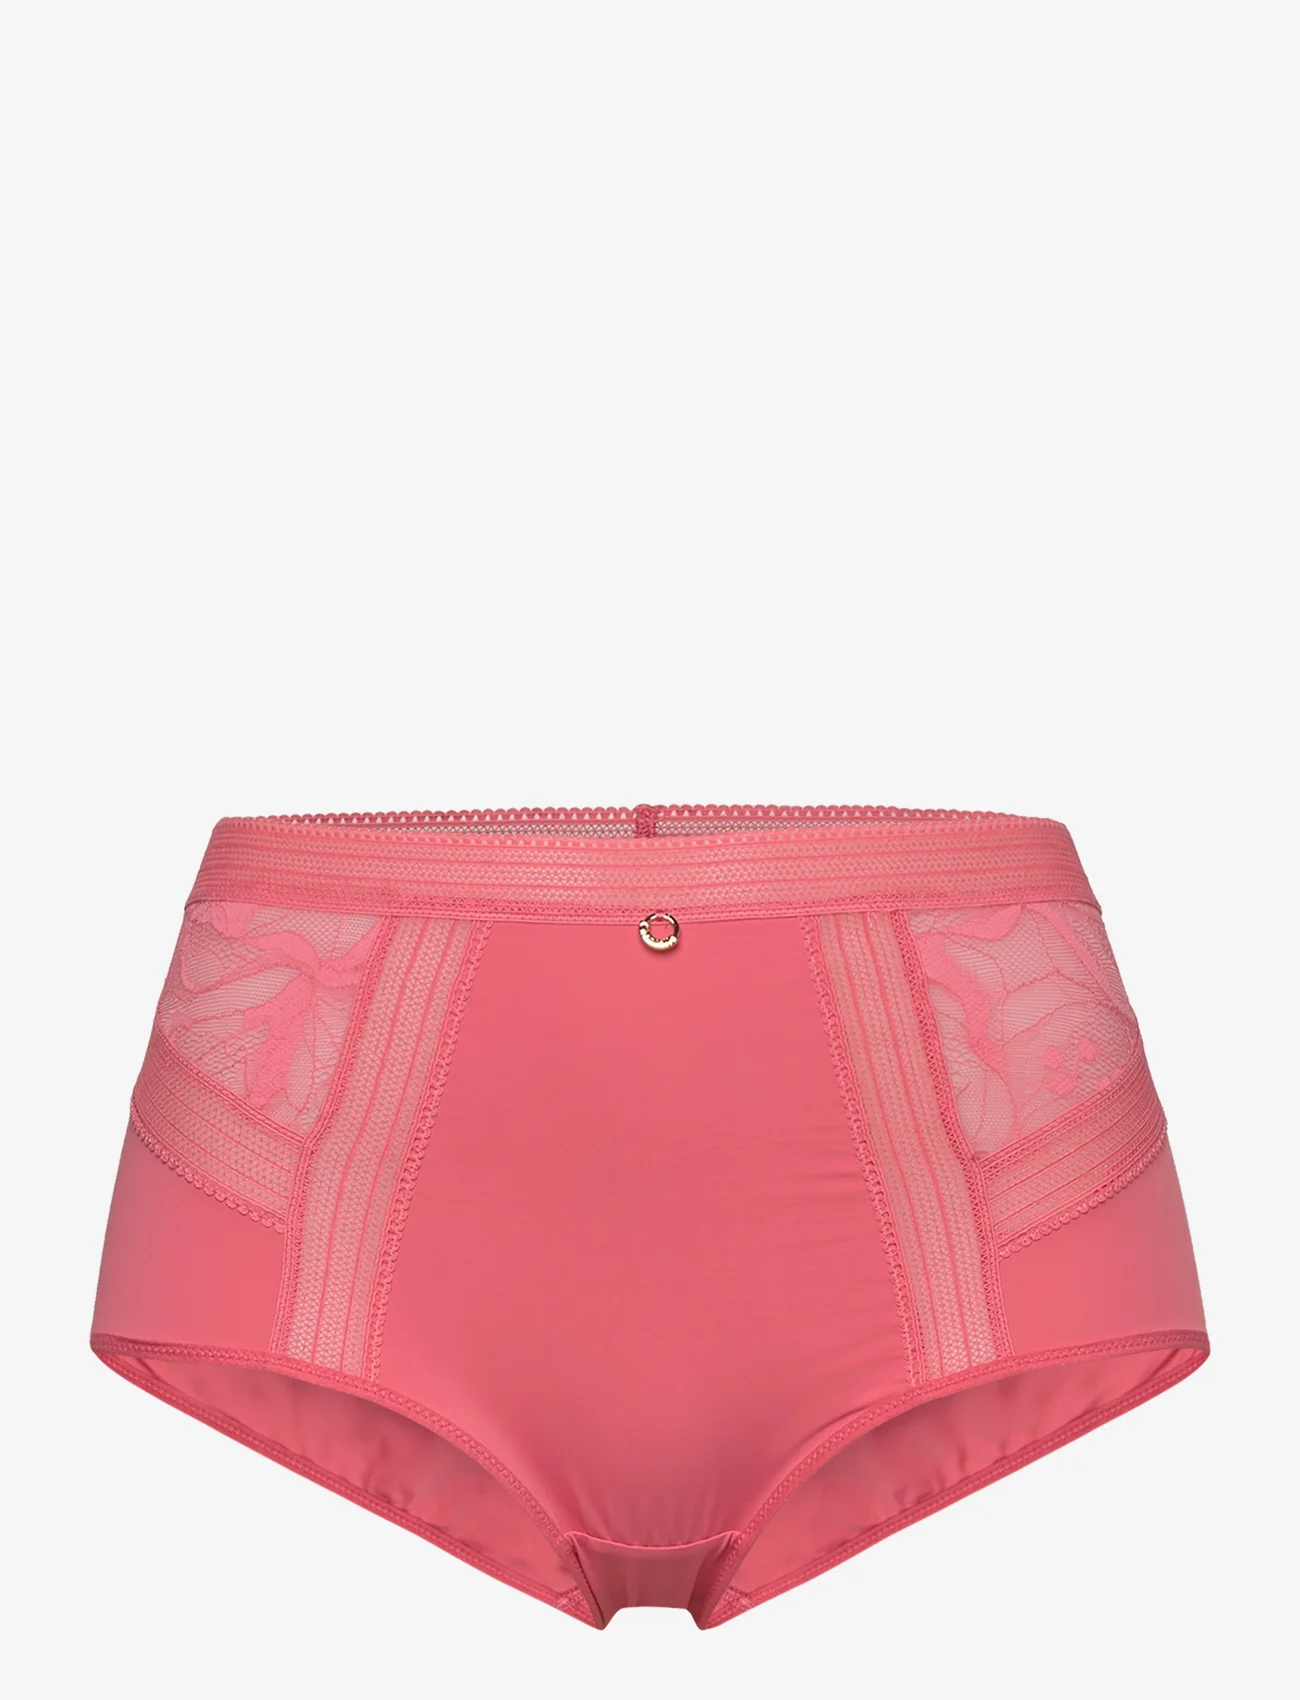 Chantelle Beach - True lace High-waisted full brief - alushousut - pink rose - 0